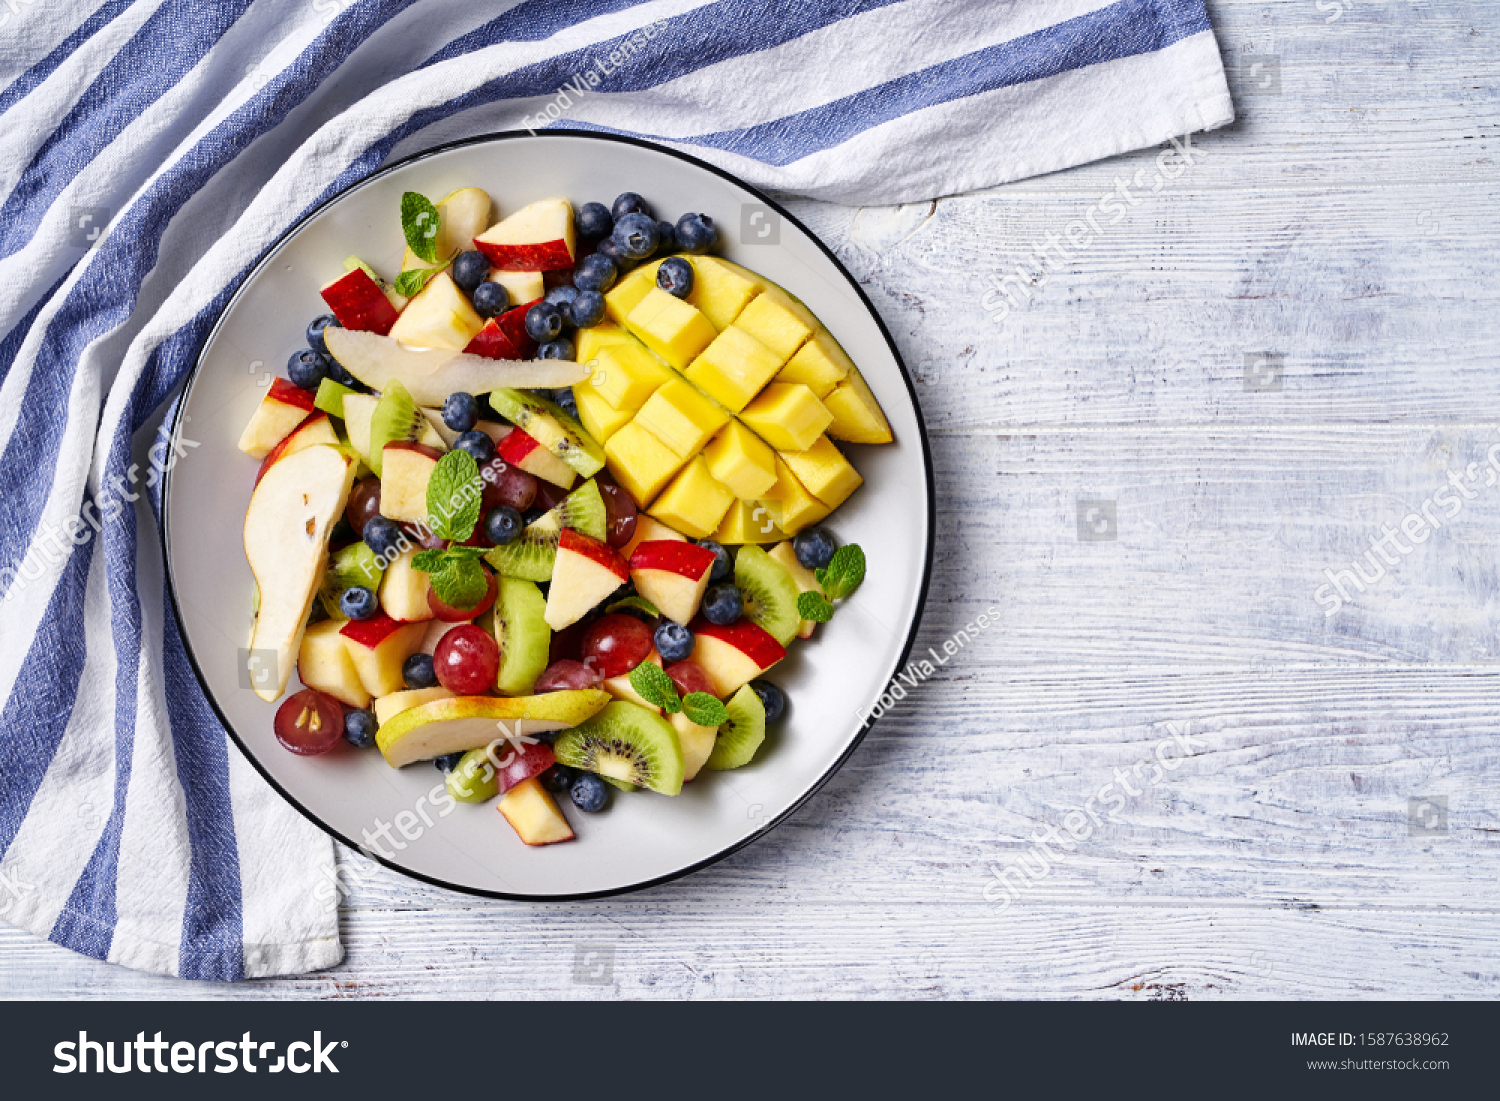 Fruit salad on a plate of mango, blueberries, red grape, pears, apple, with fresh mint, on a white wooden table, horizontal view, copy space, copy space #1587638962